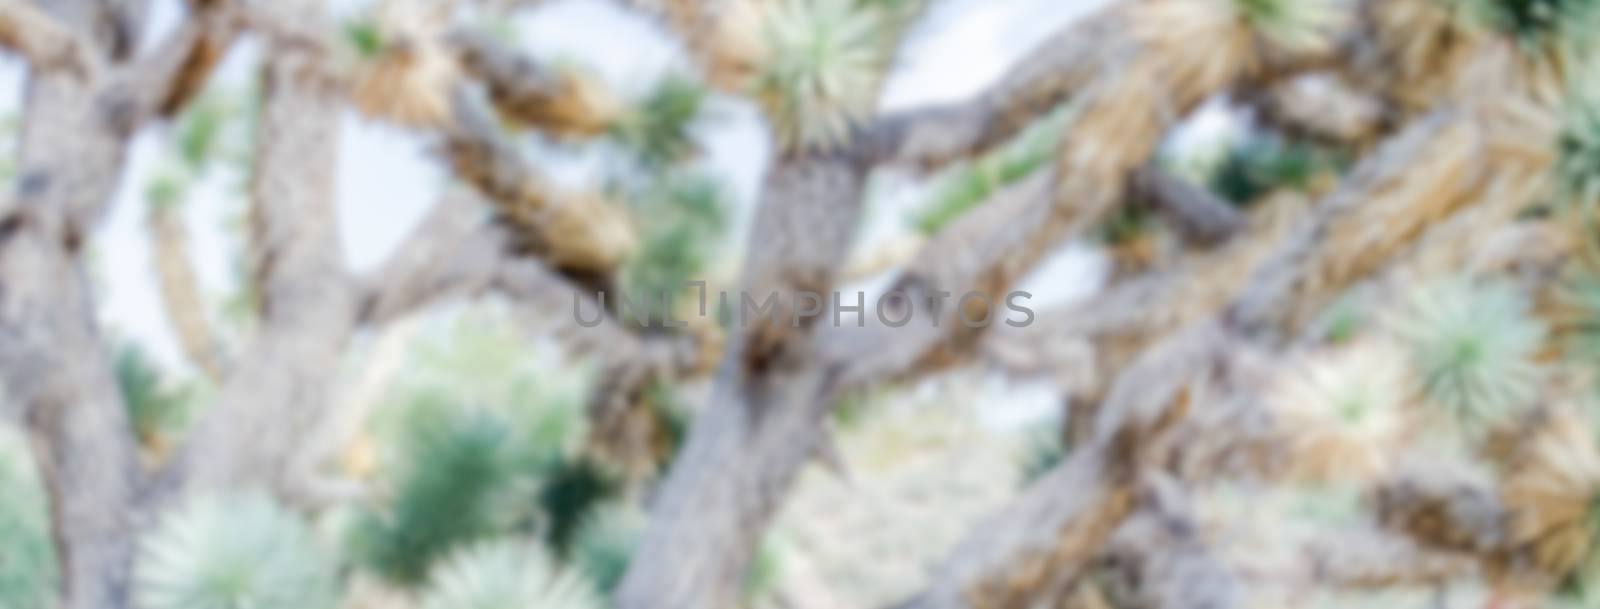 Defocused background of Joshua Trees in Arizona. Intentionally blurred post production for bokeh effect